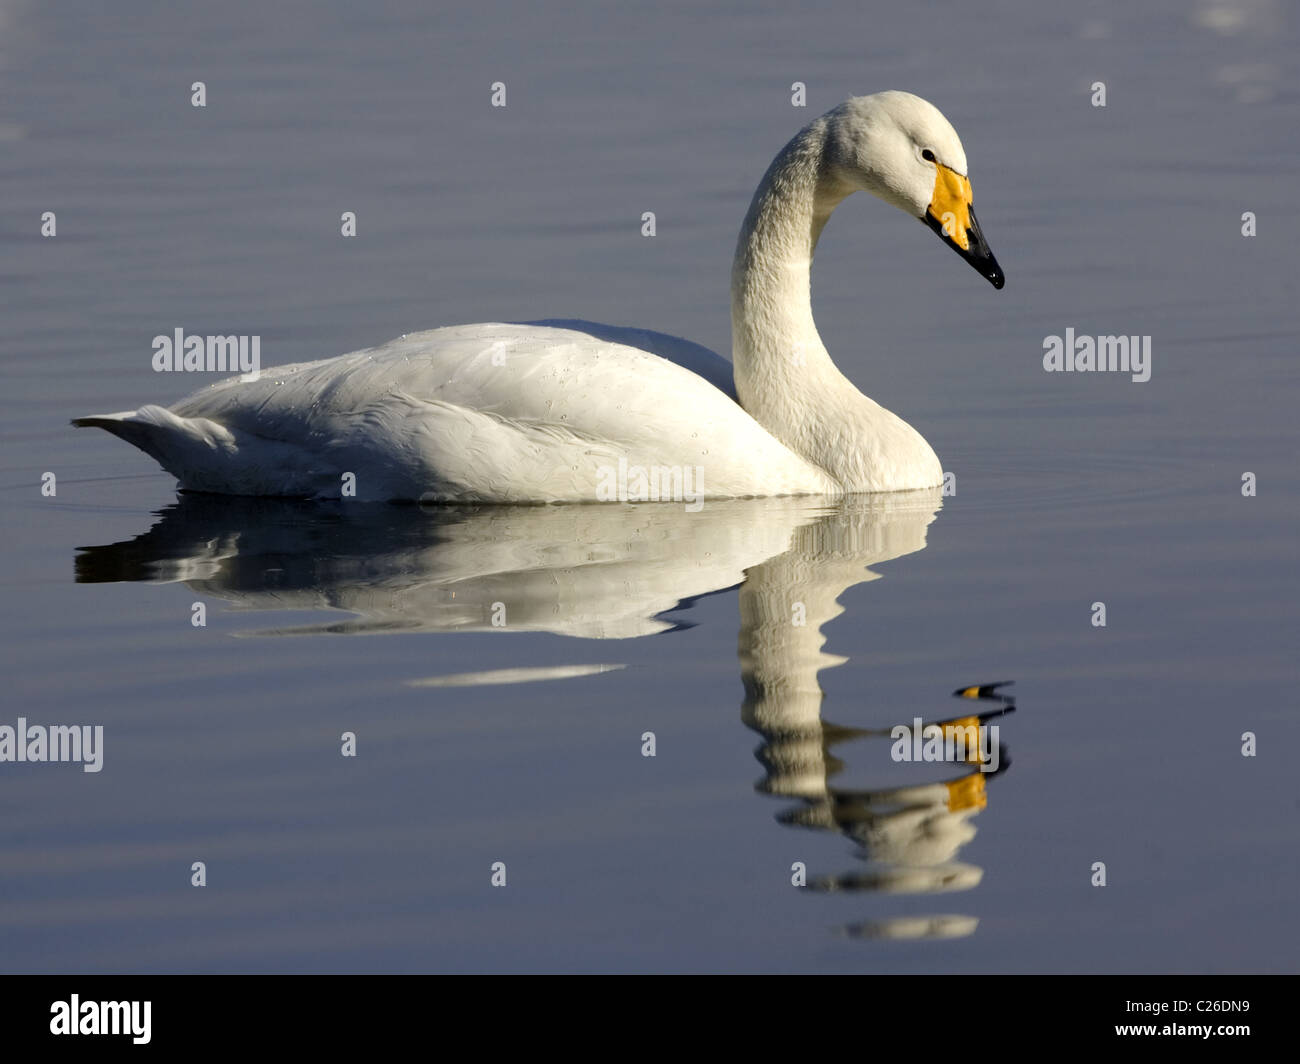 Whooper swan swimming with reflection Stock Photo